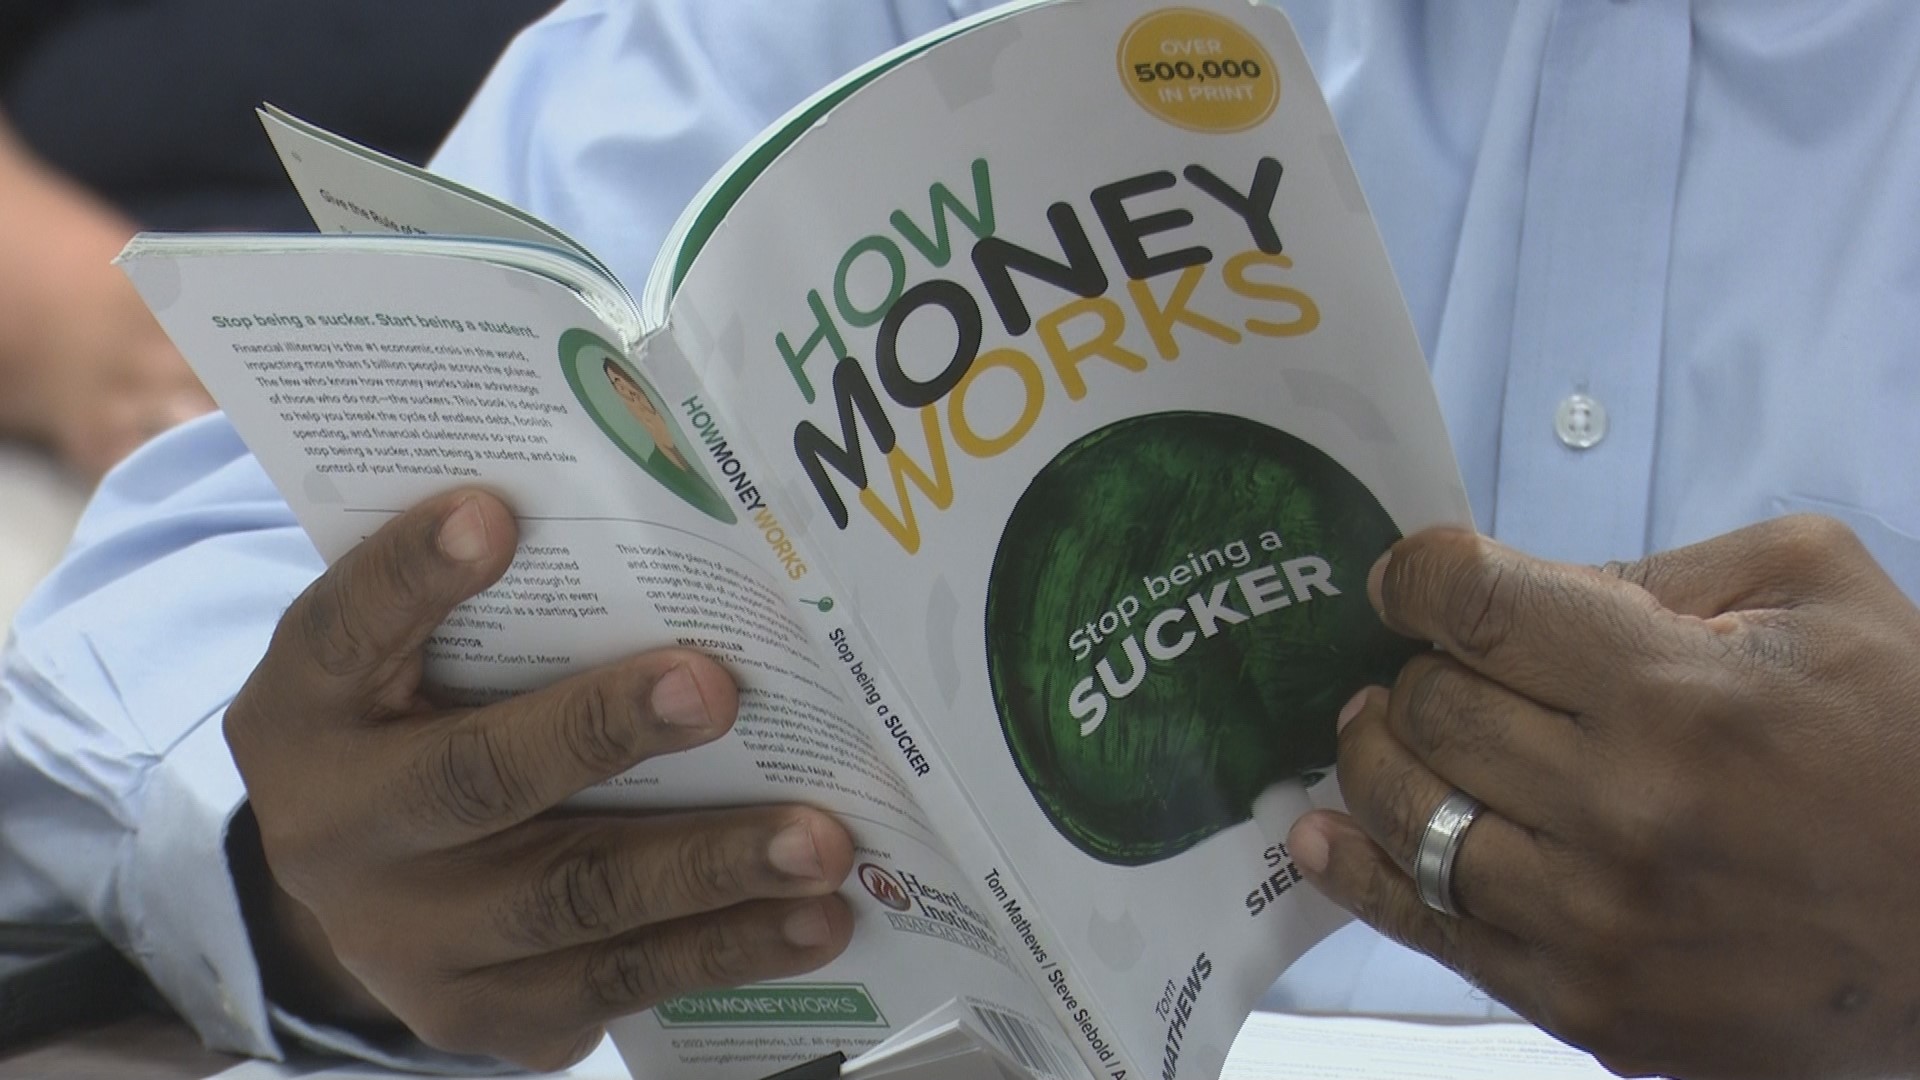 Employees will have access to free monthly financial literacy classes for up to twelve months. The company WealthWave Educators will provide free work booklets too.